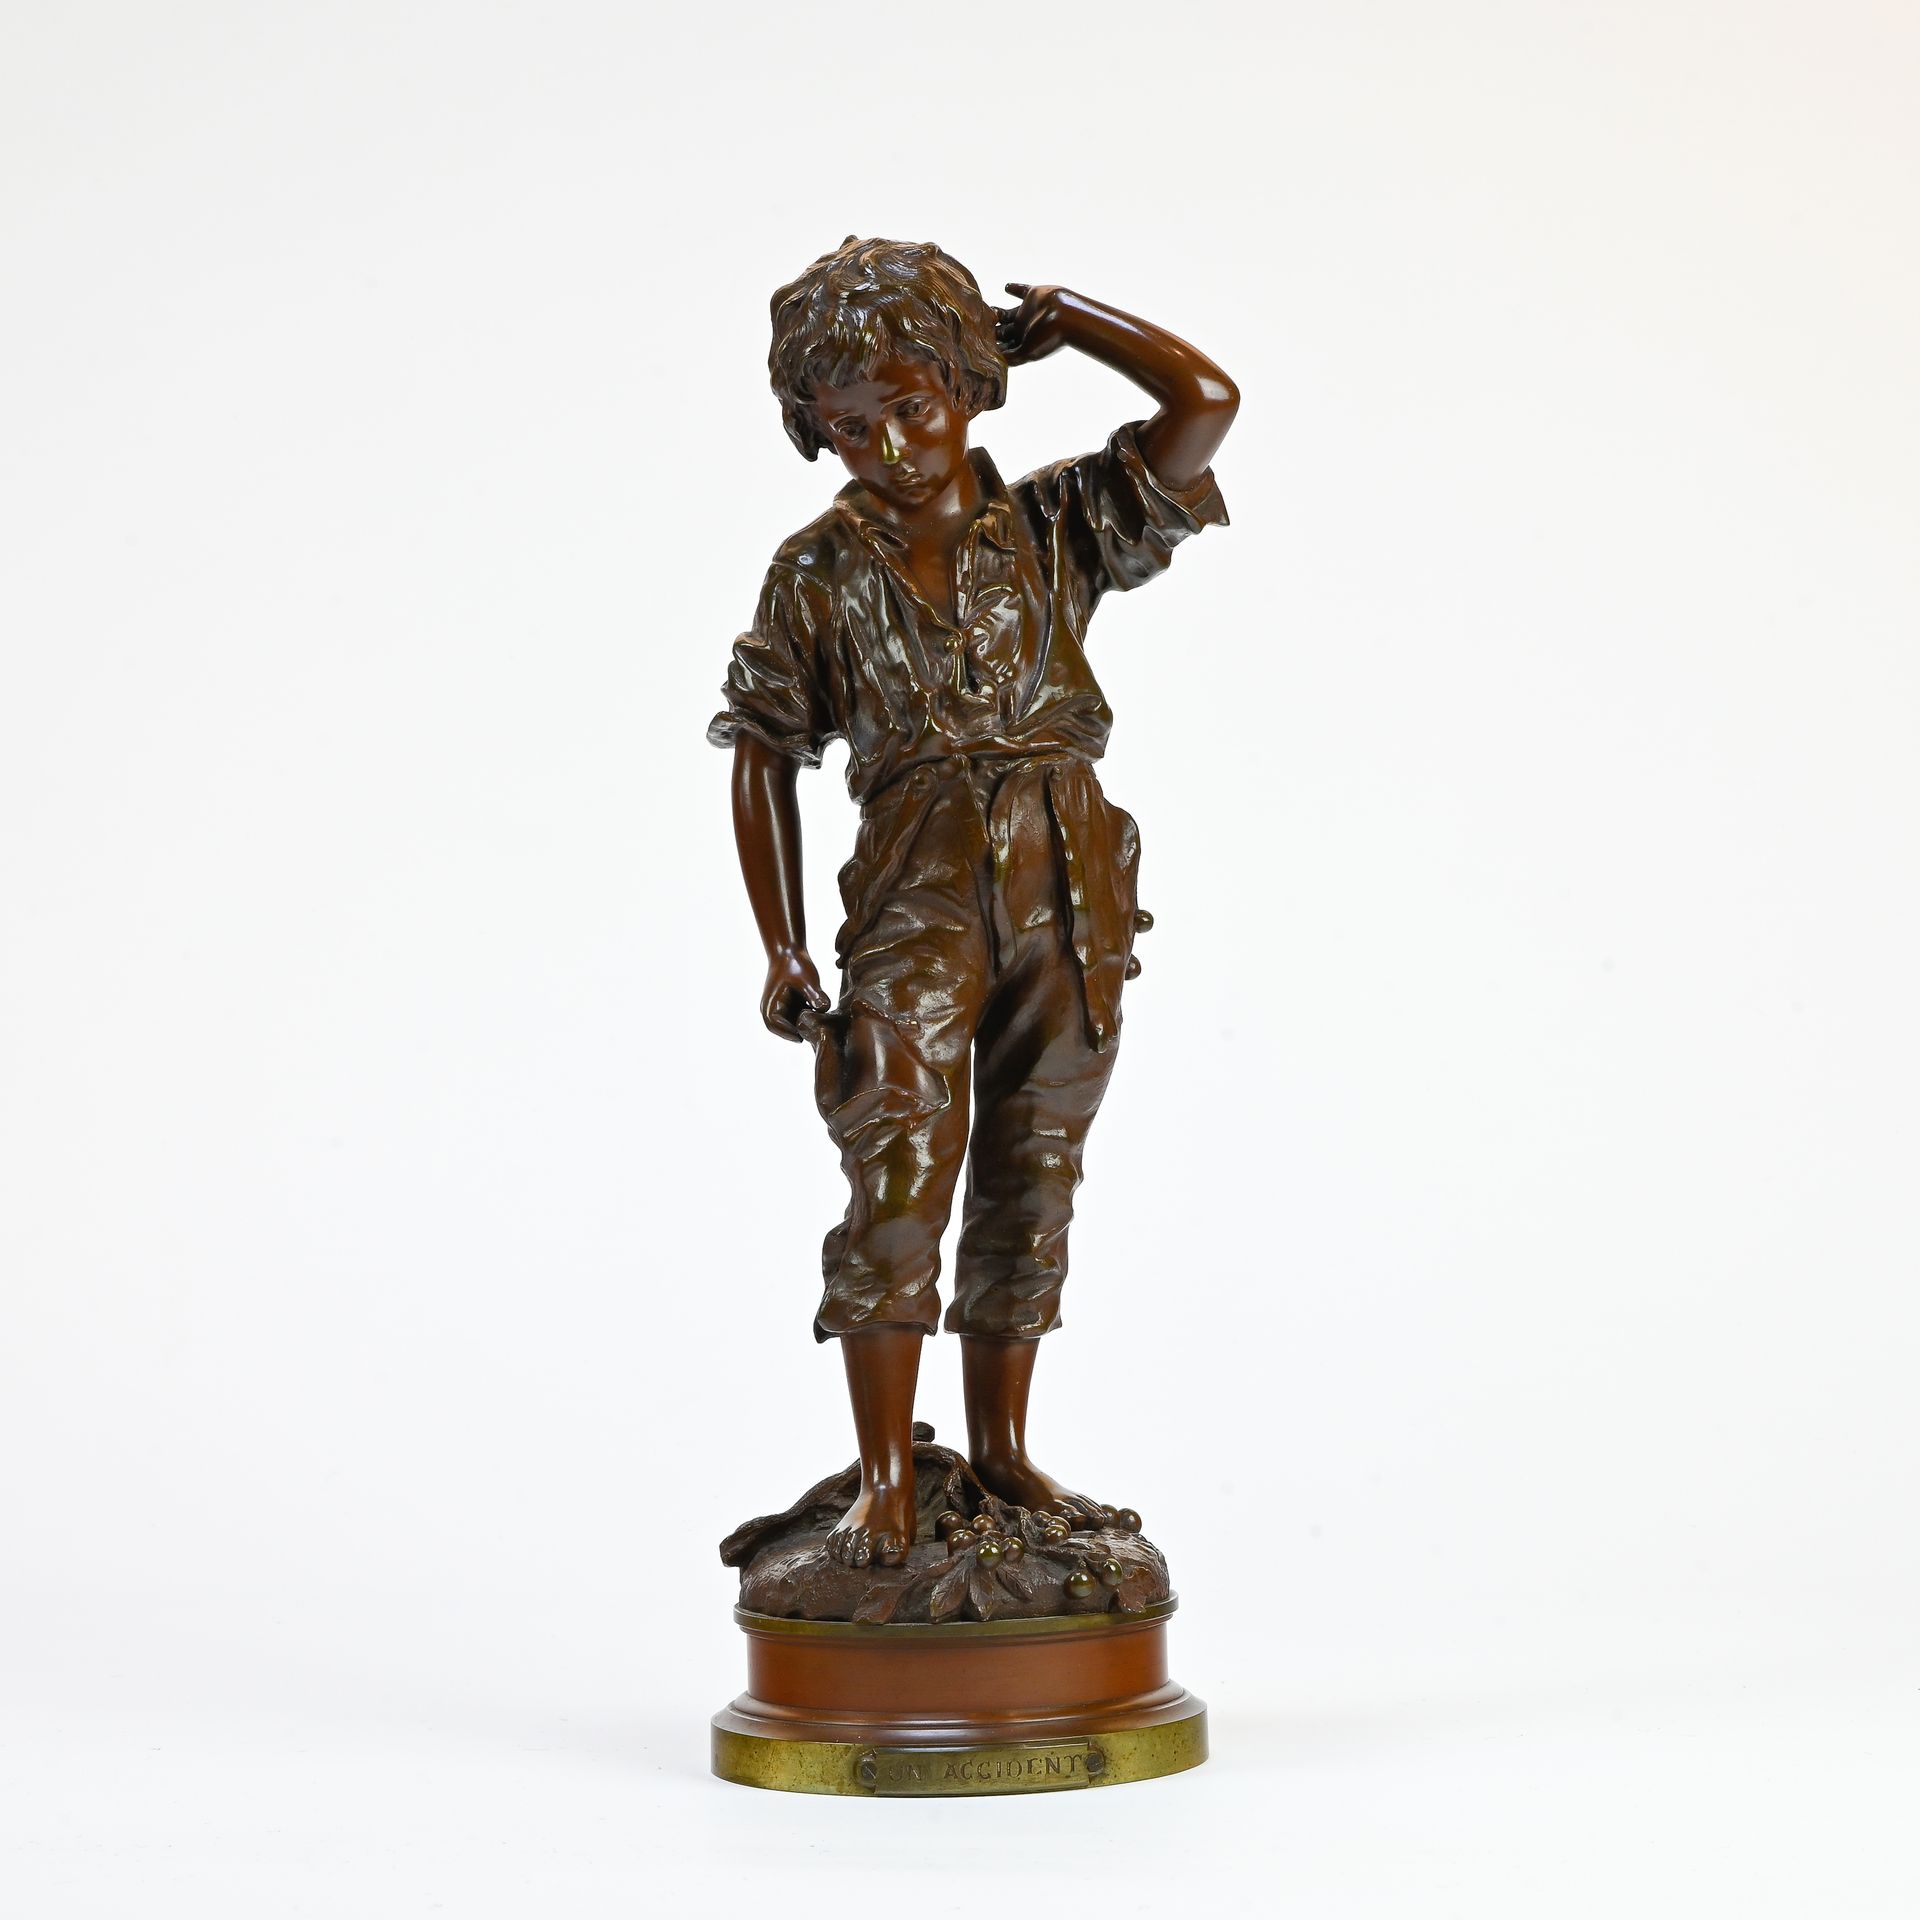 CHARLES ANFRIE (1833 - 1905) Charles Anfrie (1833-1905)

An accident



Bronze s&hellip;